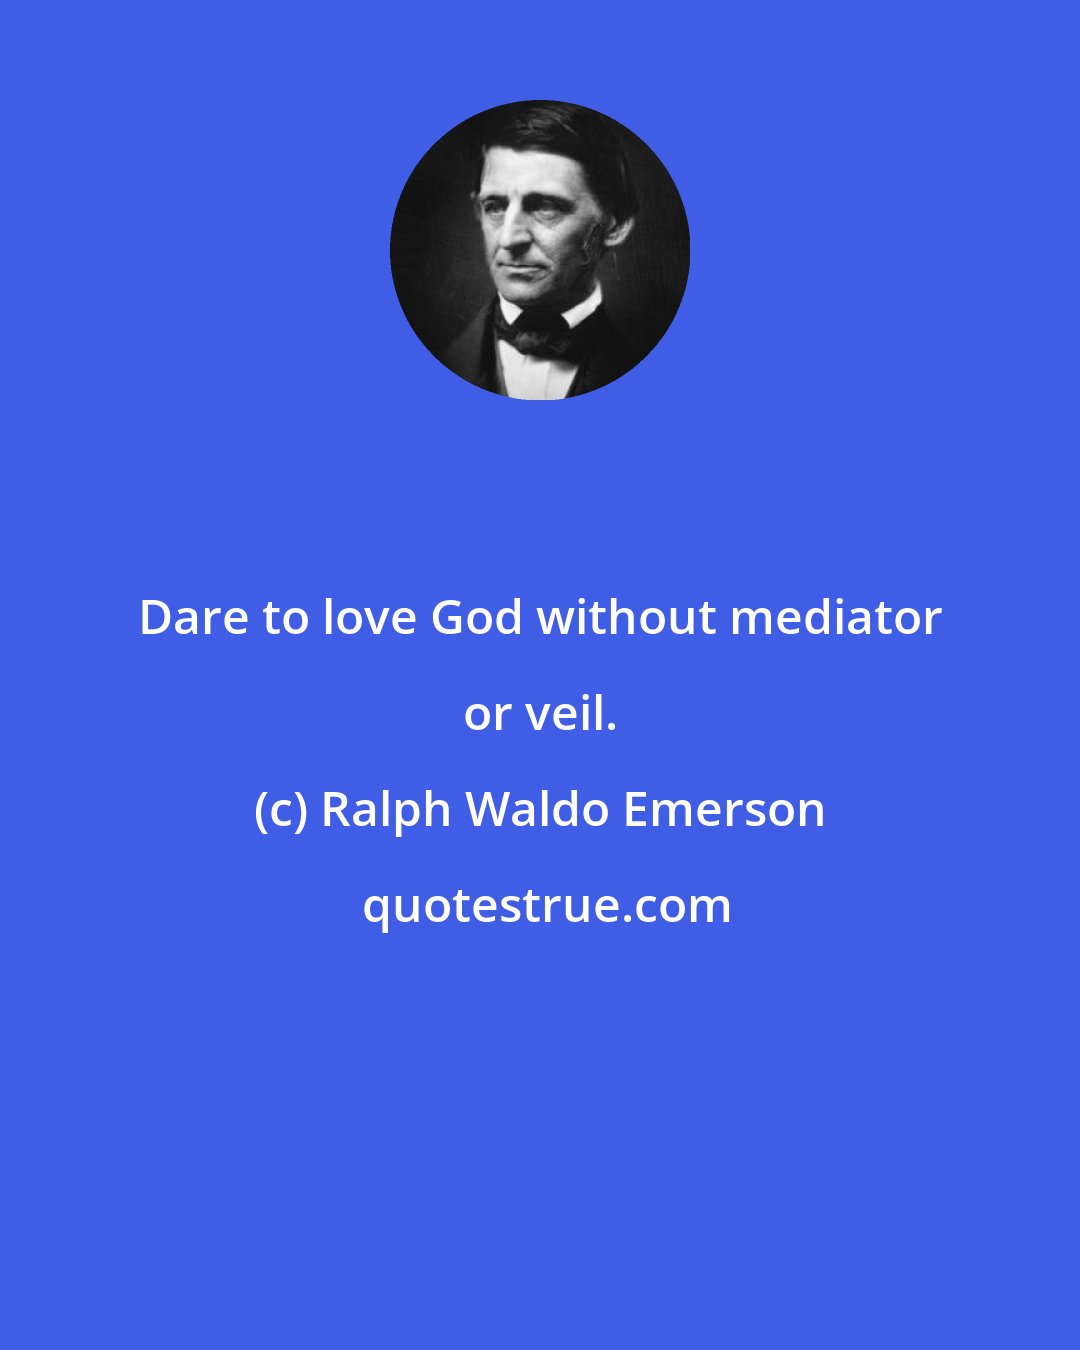 Ralph Waldo Emerson: Dare to love God without mediator or veil.